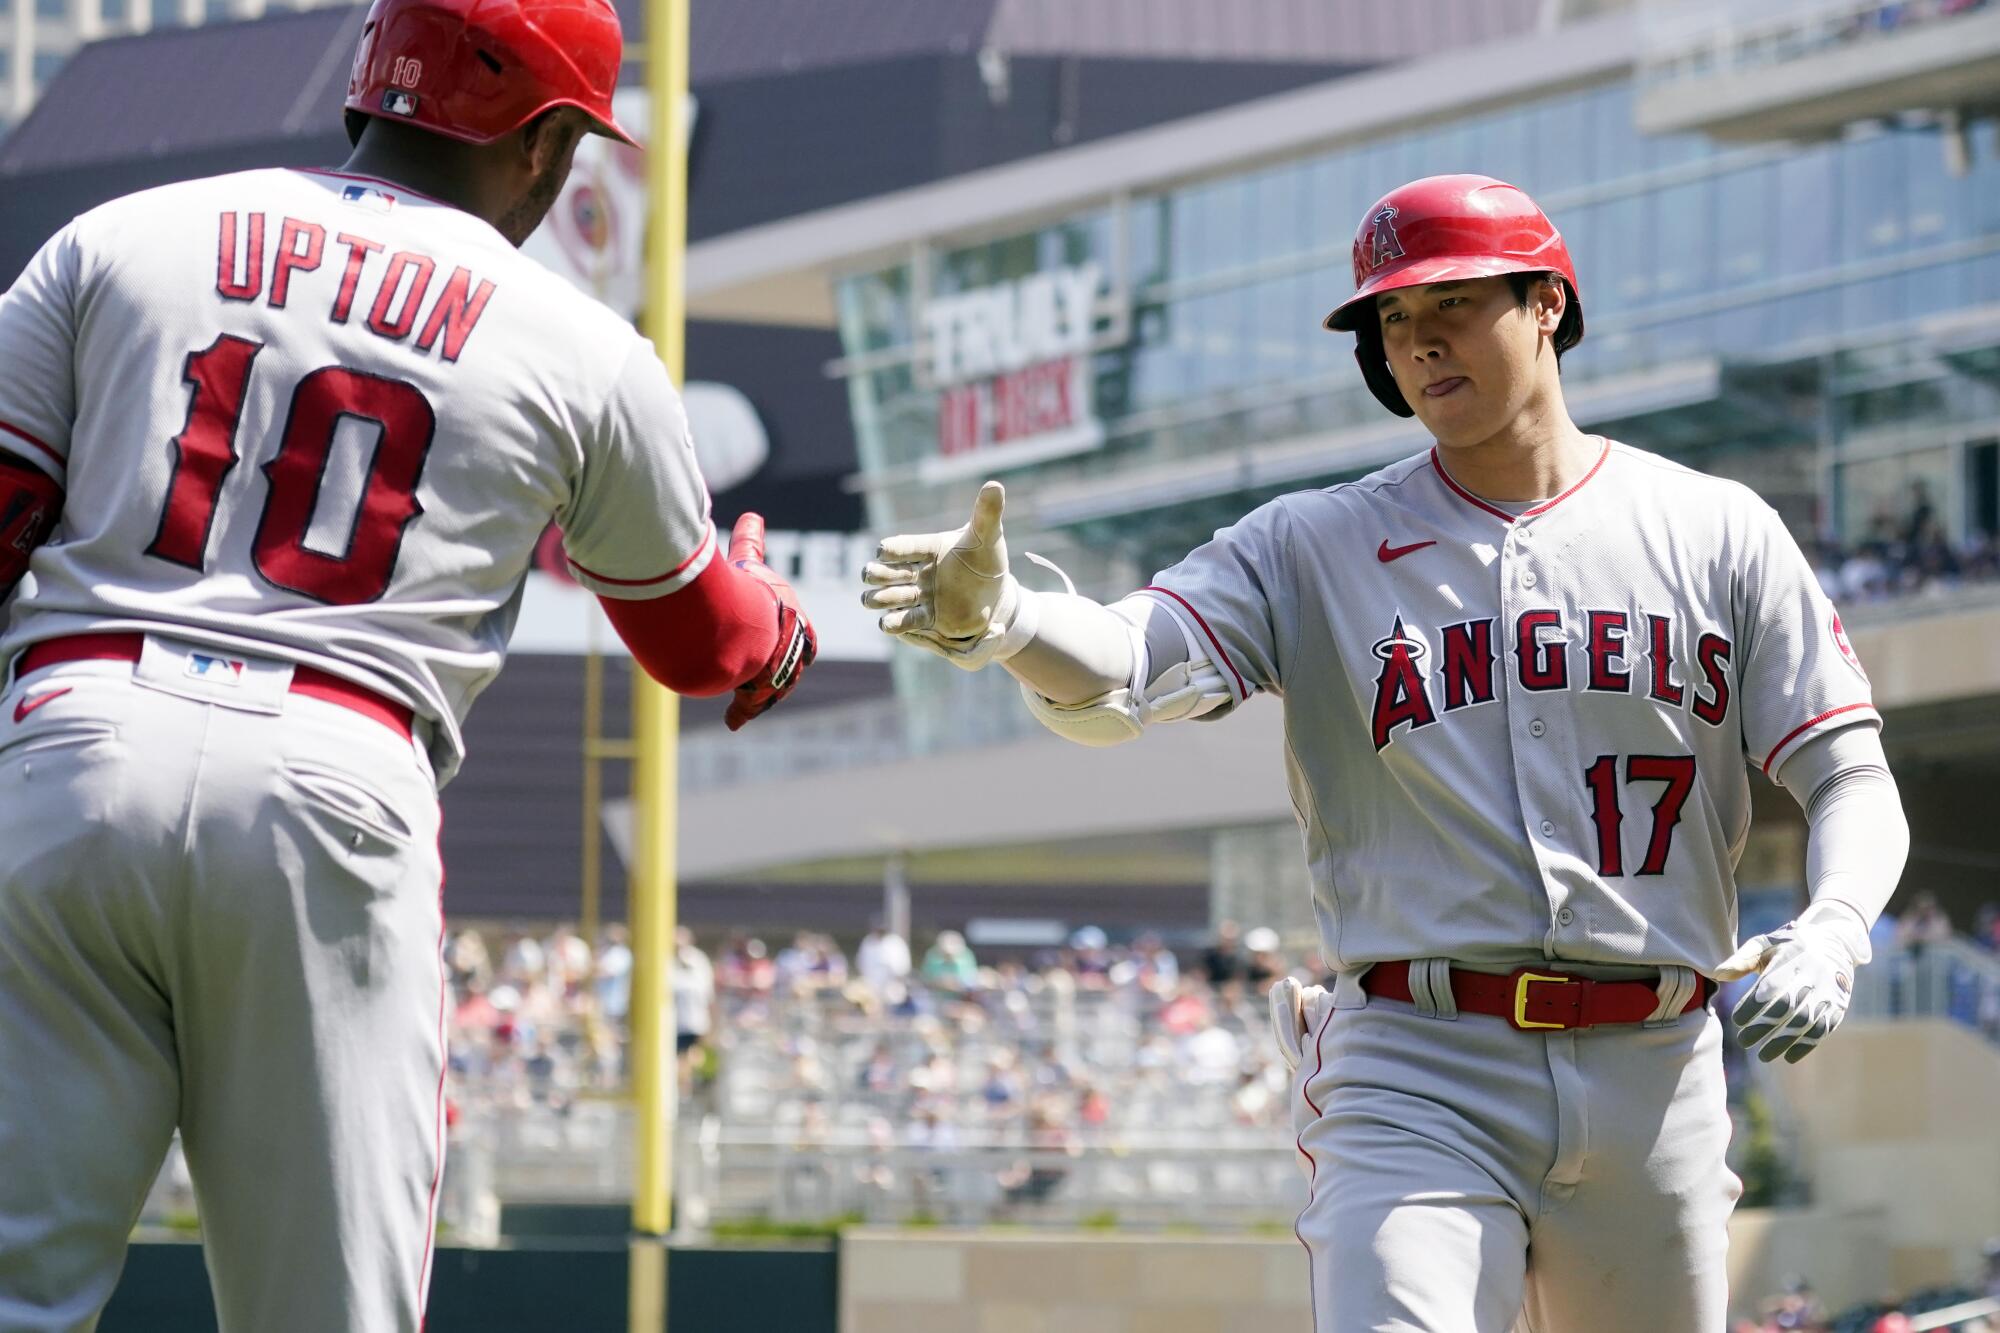 Mike Trout stays in the yard, falls one game shy of consecutive